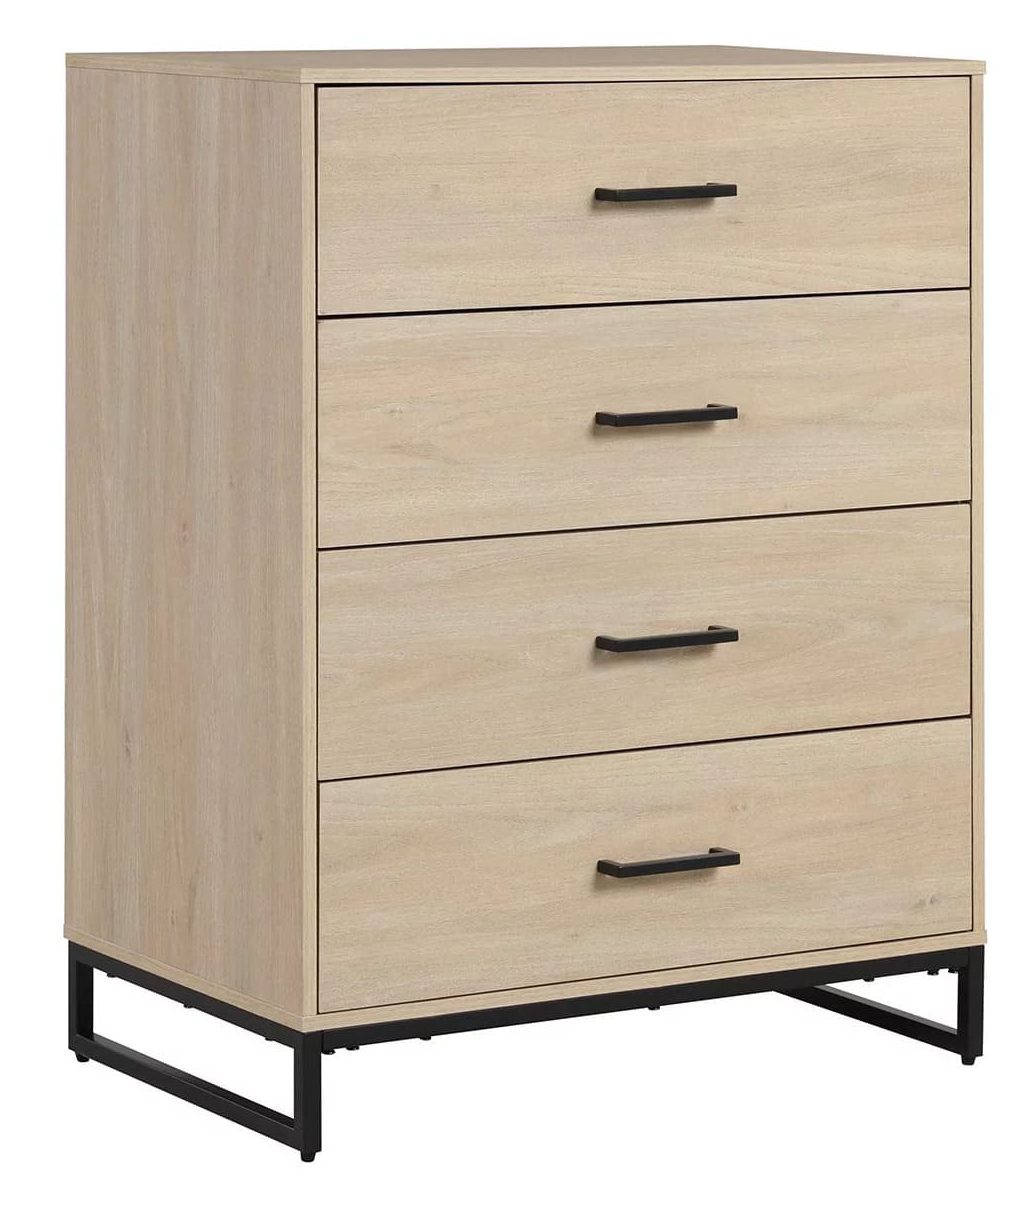 Mainstays 4-drawer industrial chest of drawers 